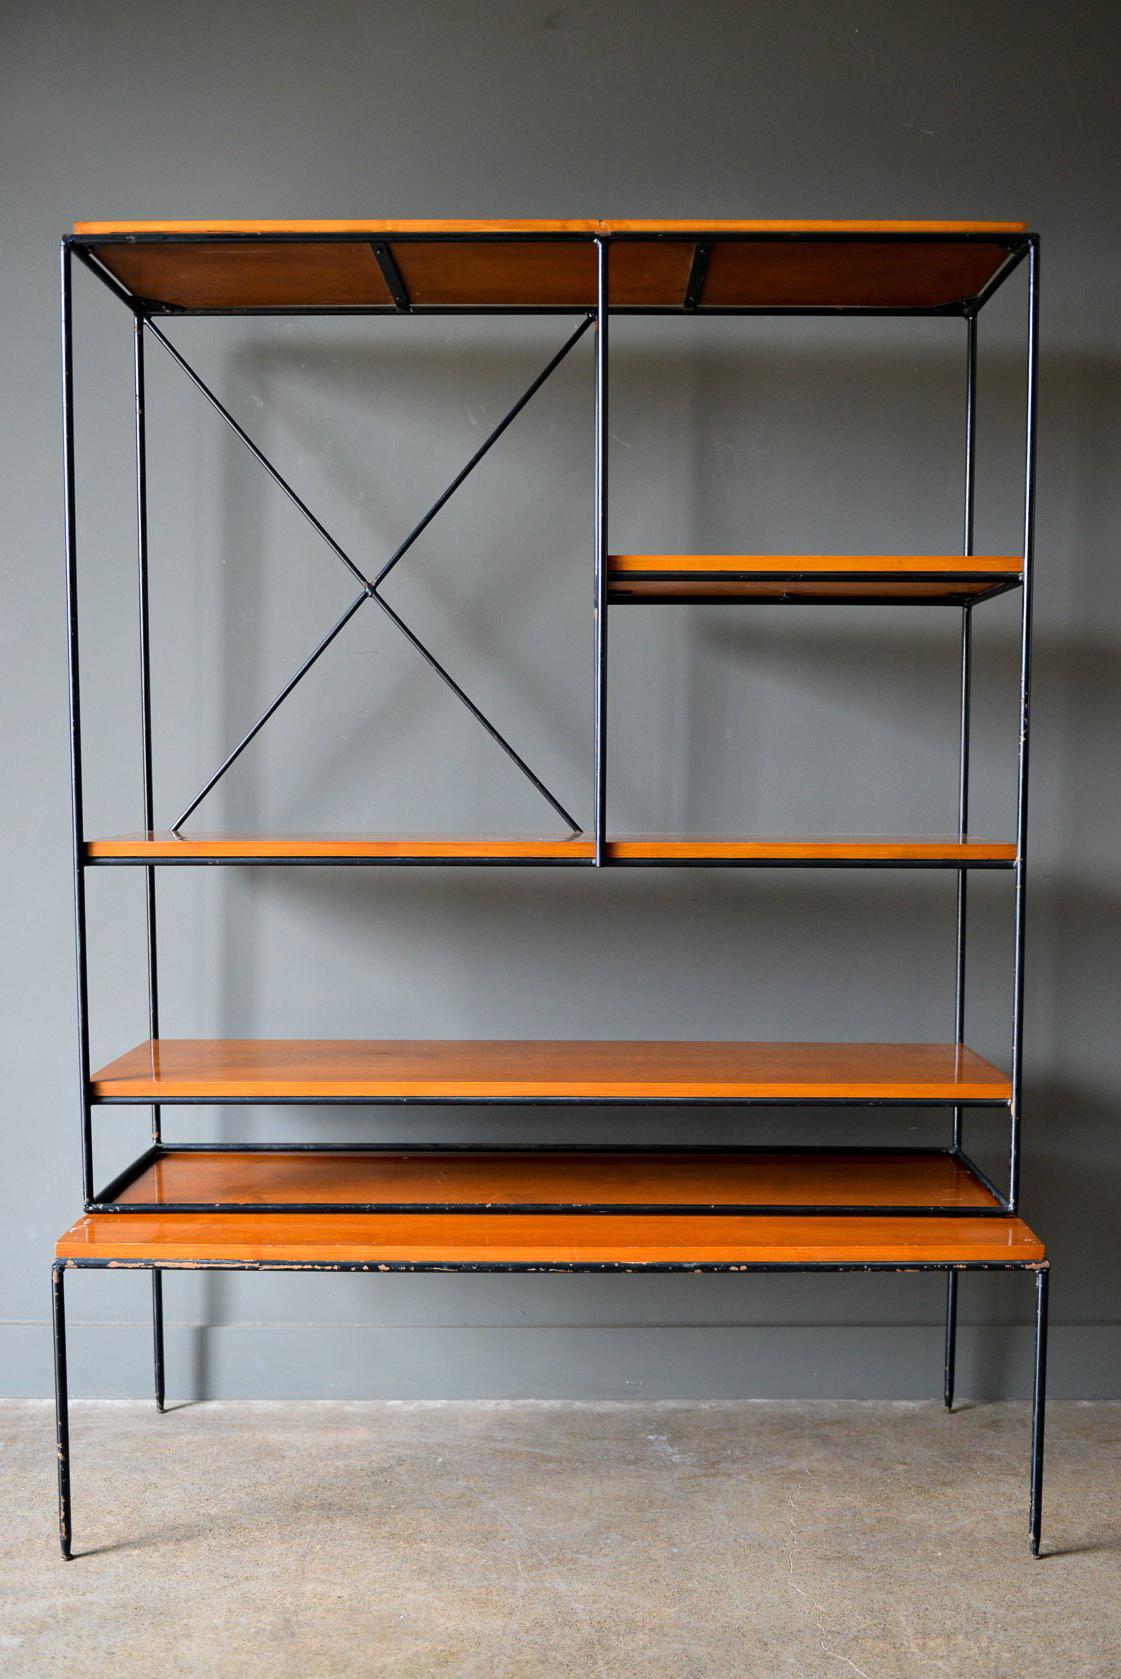 Early production Paul McCobb Planner Group iron and maple shelving unit or room divider, circa 1950. Original iron frame and feet, maple shelves with solid wrought iron frame. Two pieces, top is separate from bottom table and floats on base.